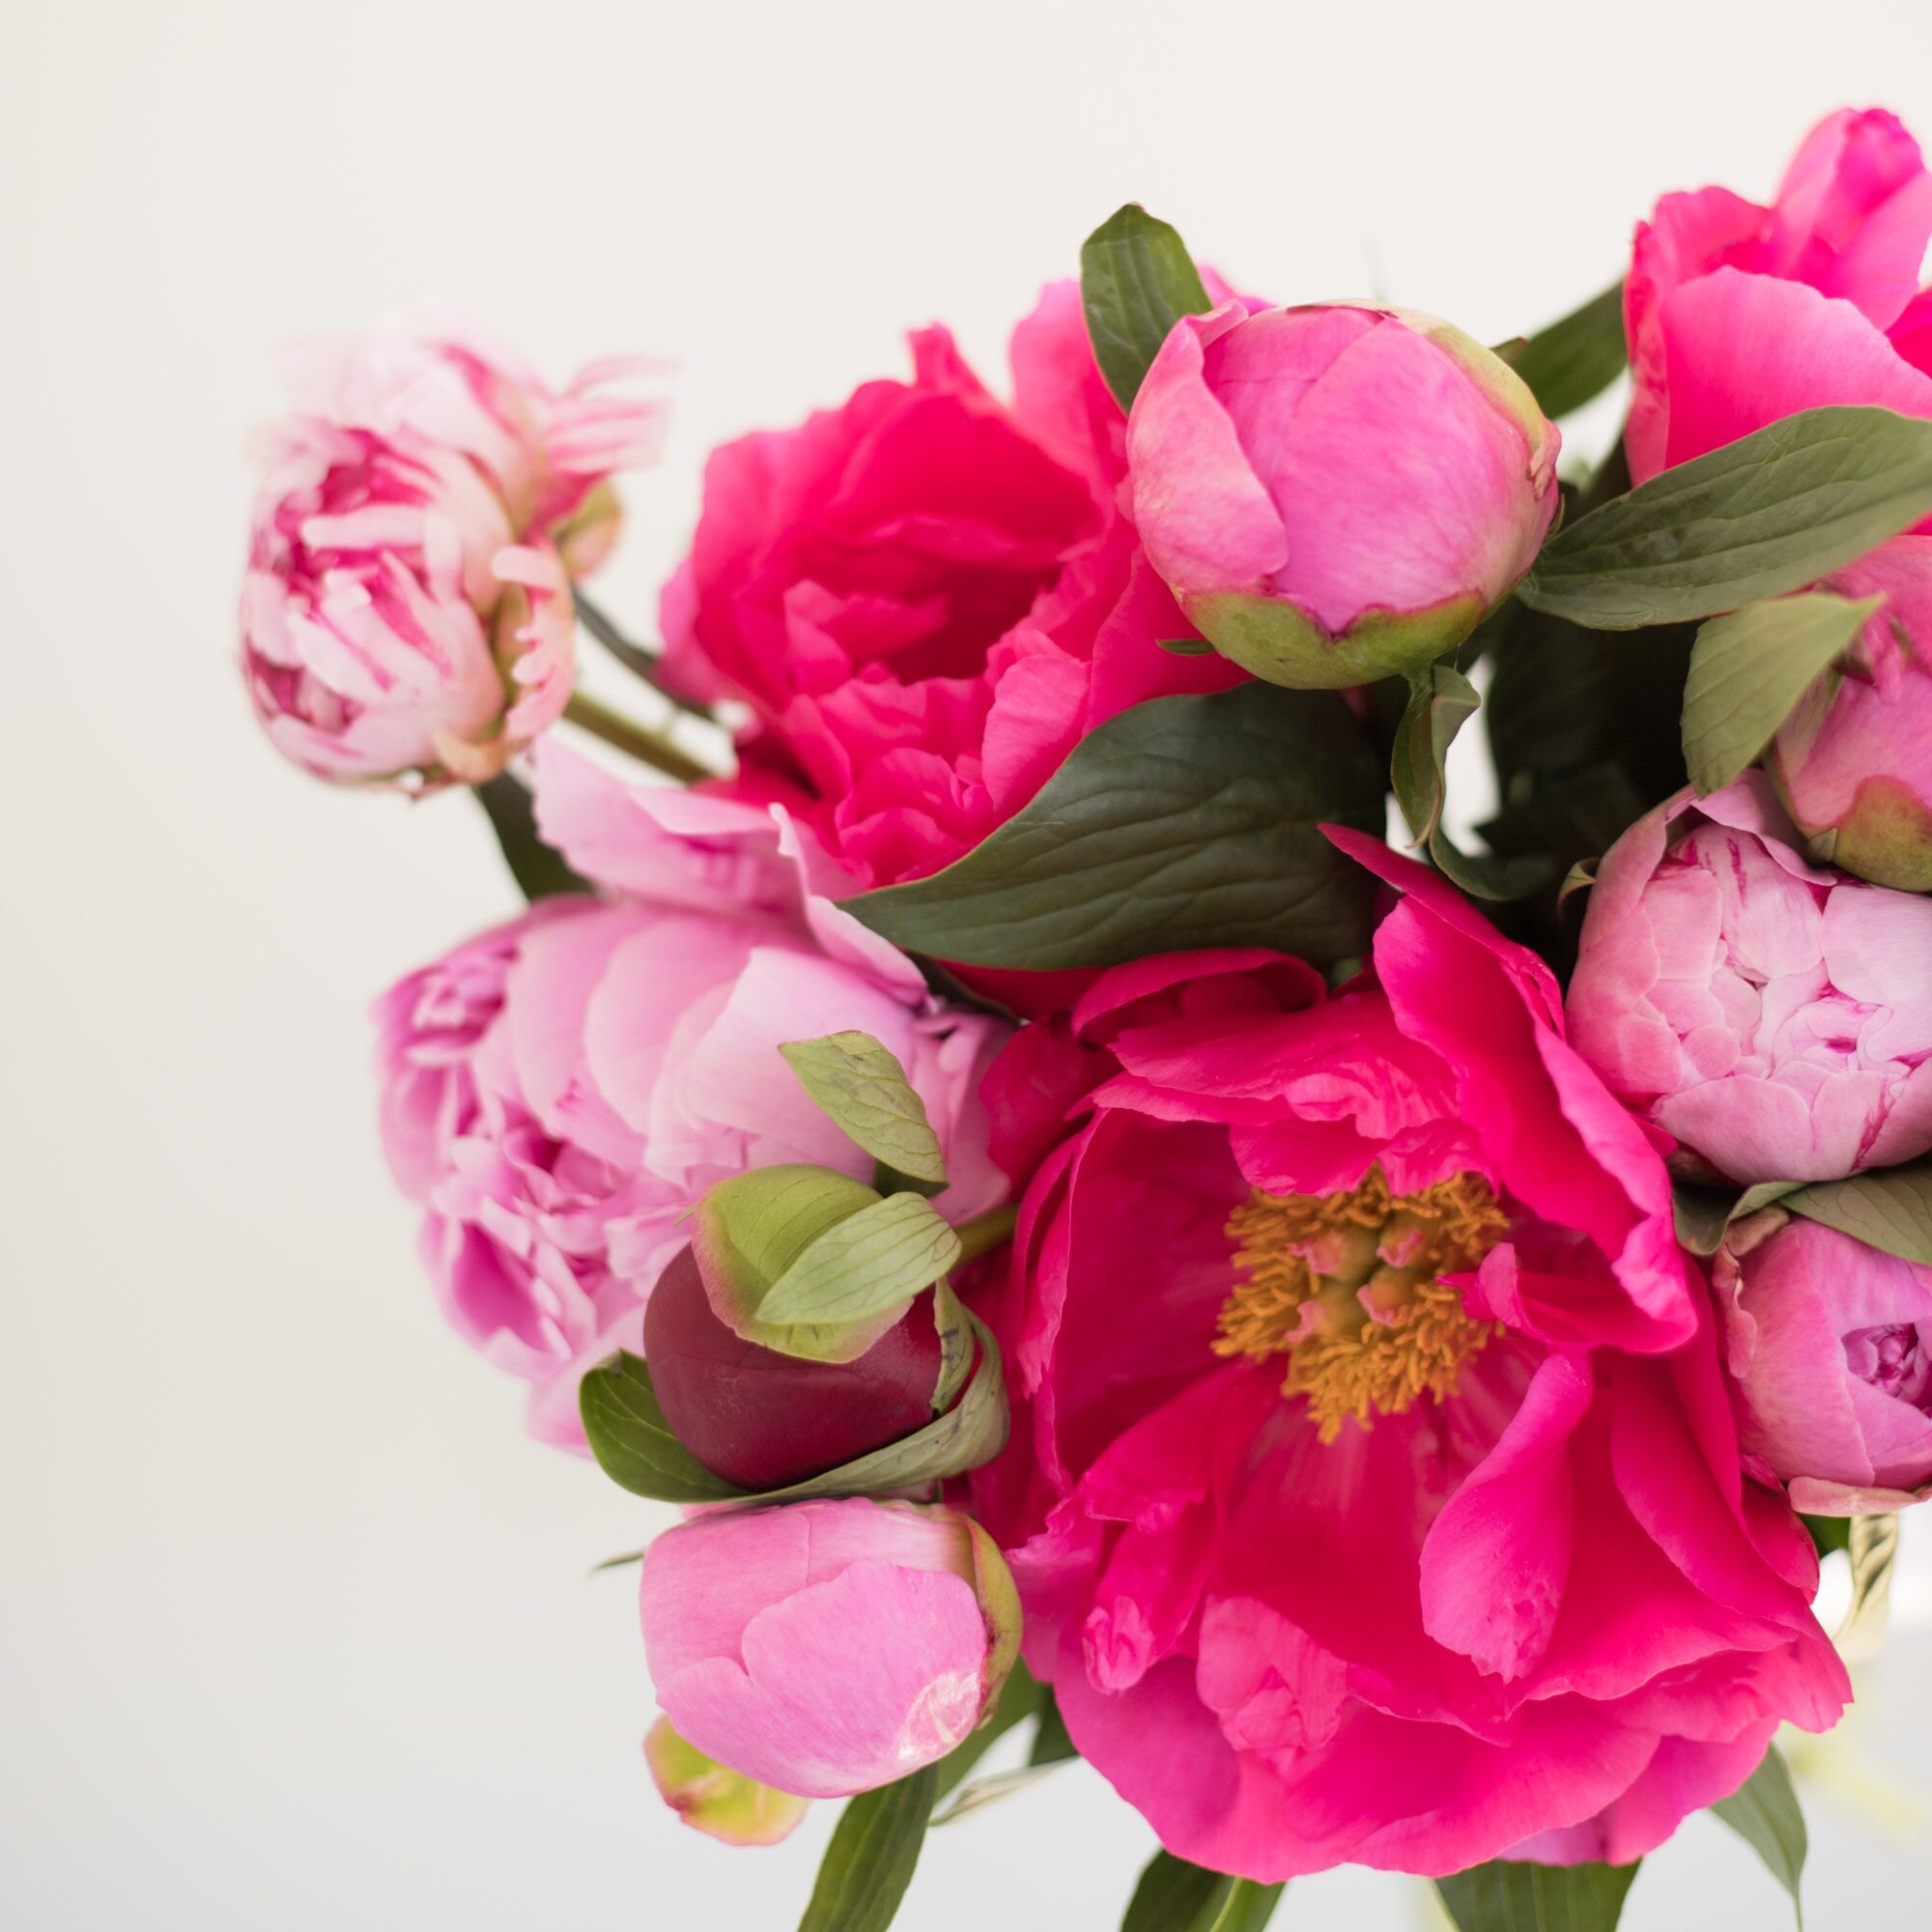 A closeup of bright pink and light pink peonies in bloom and in bud form